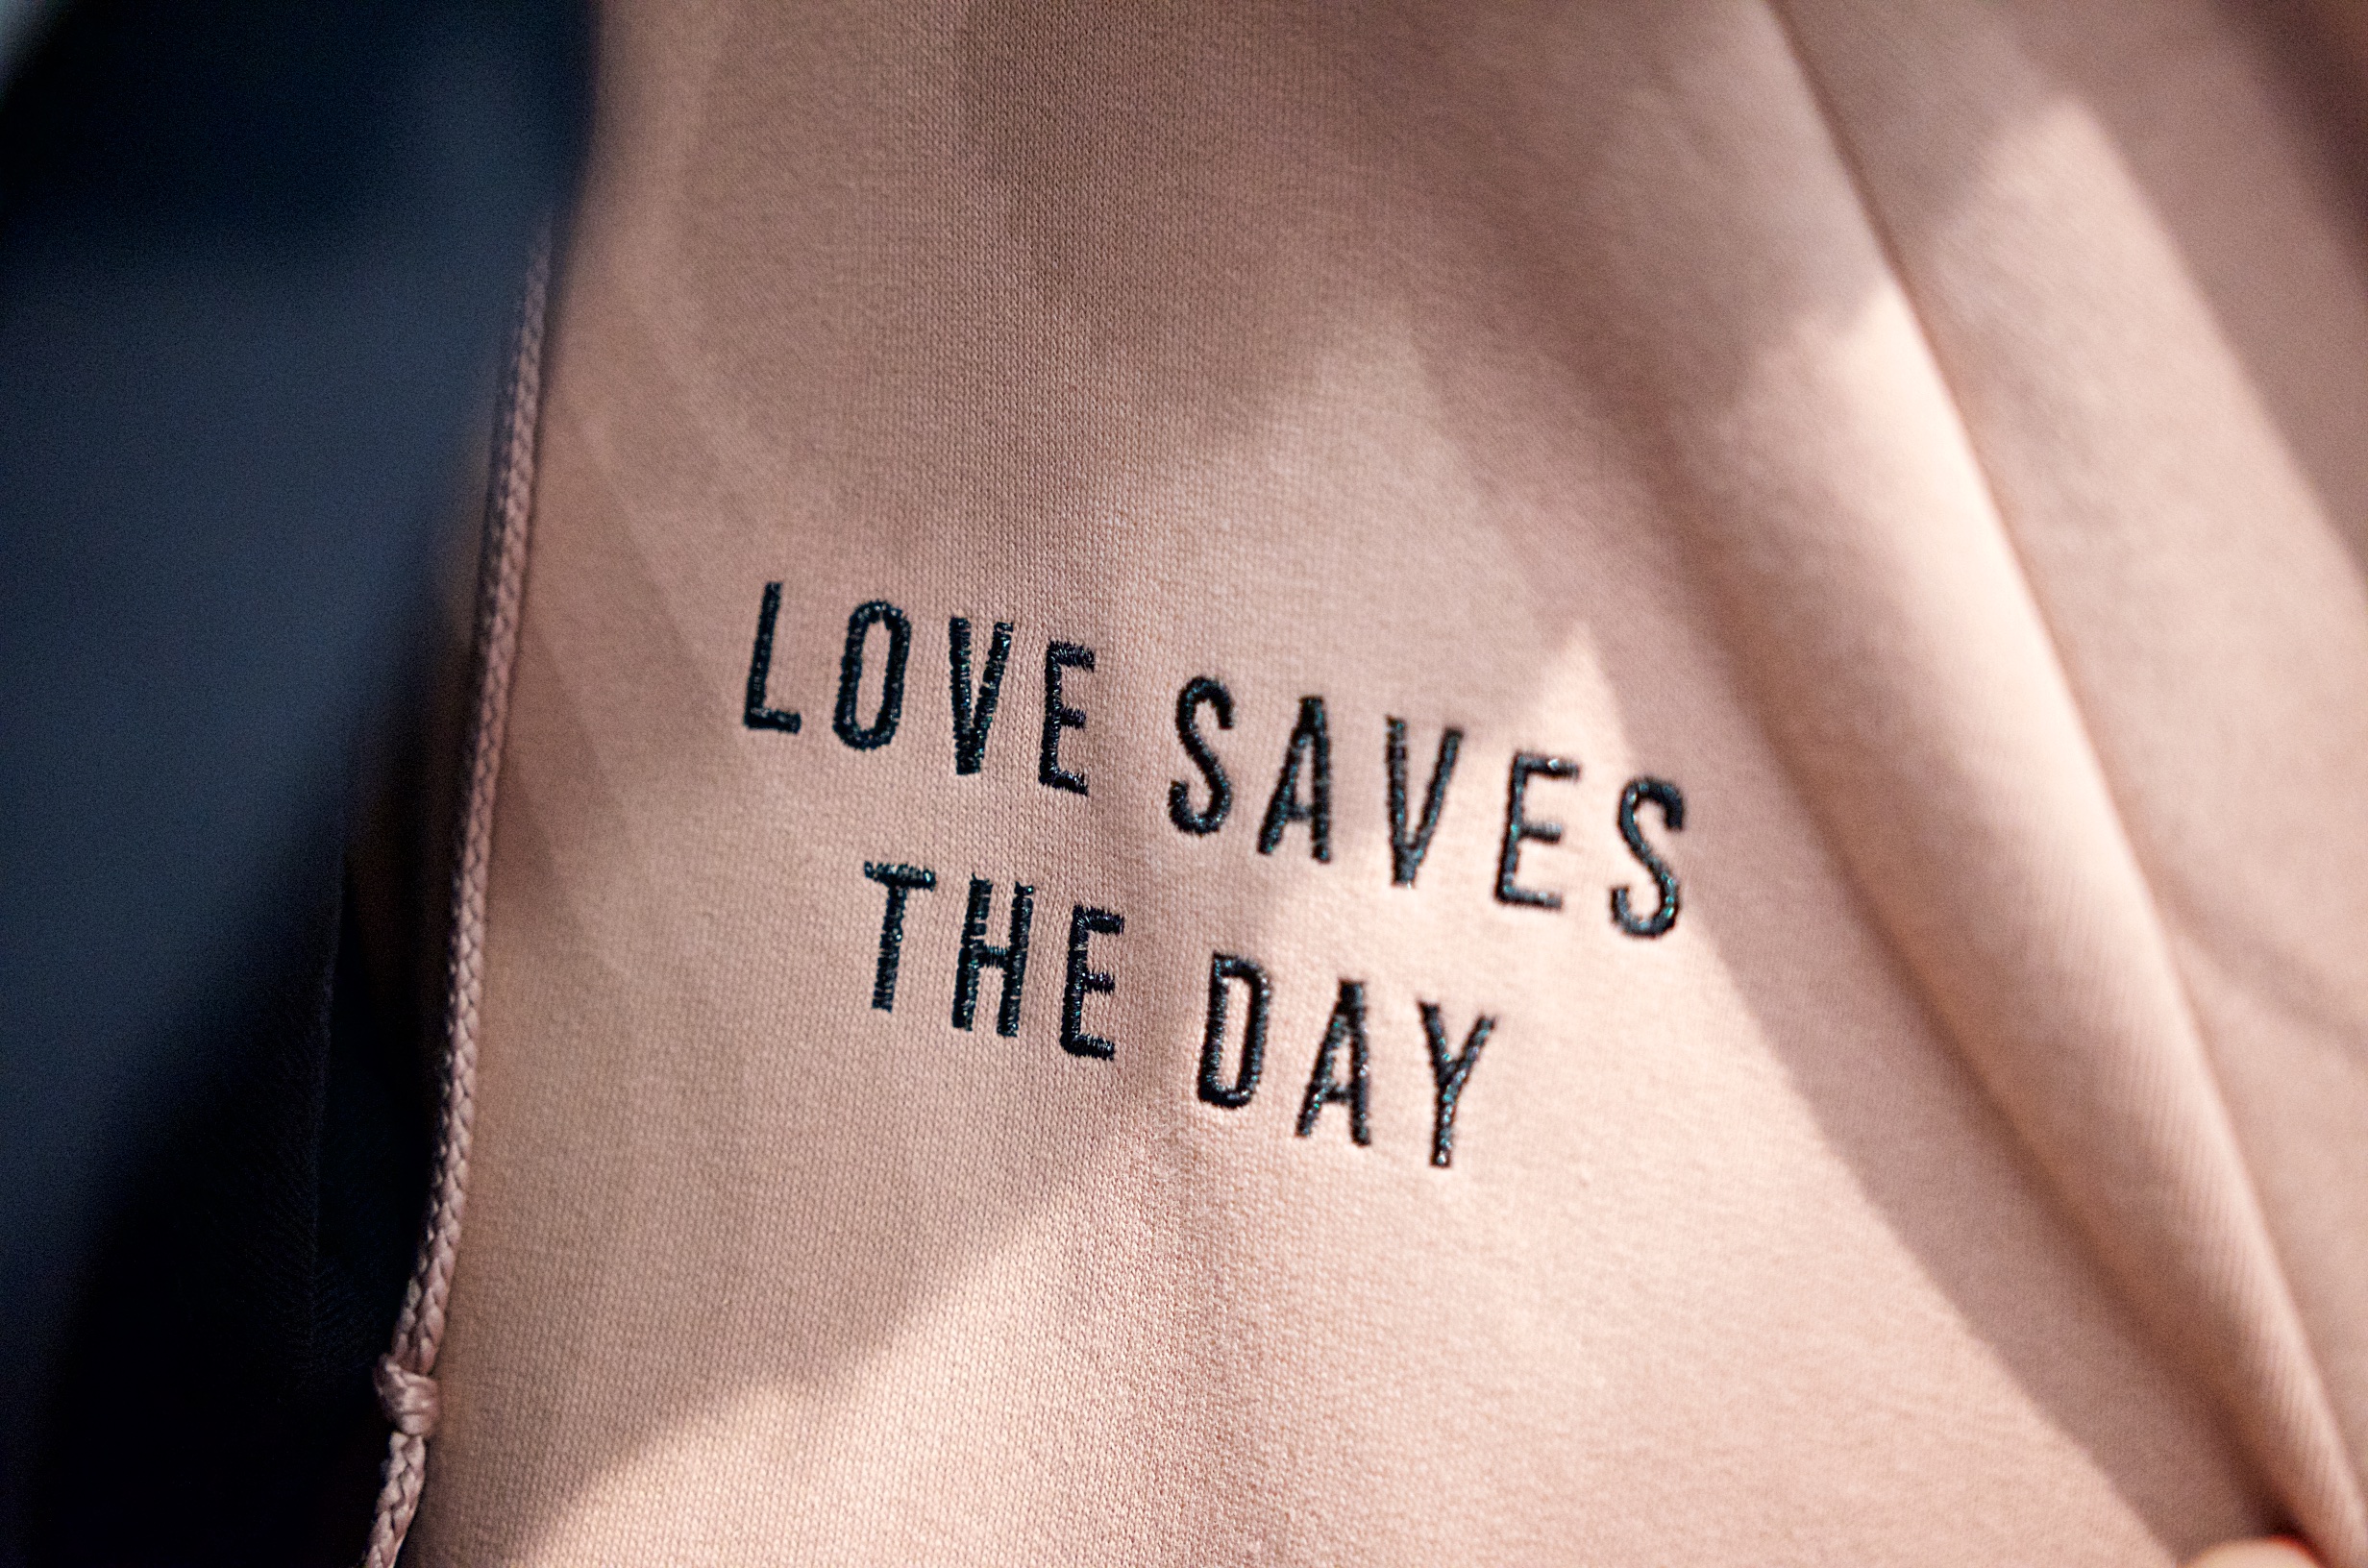 Love saves the day